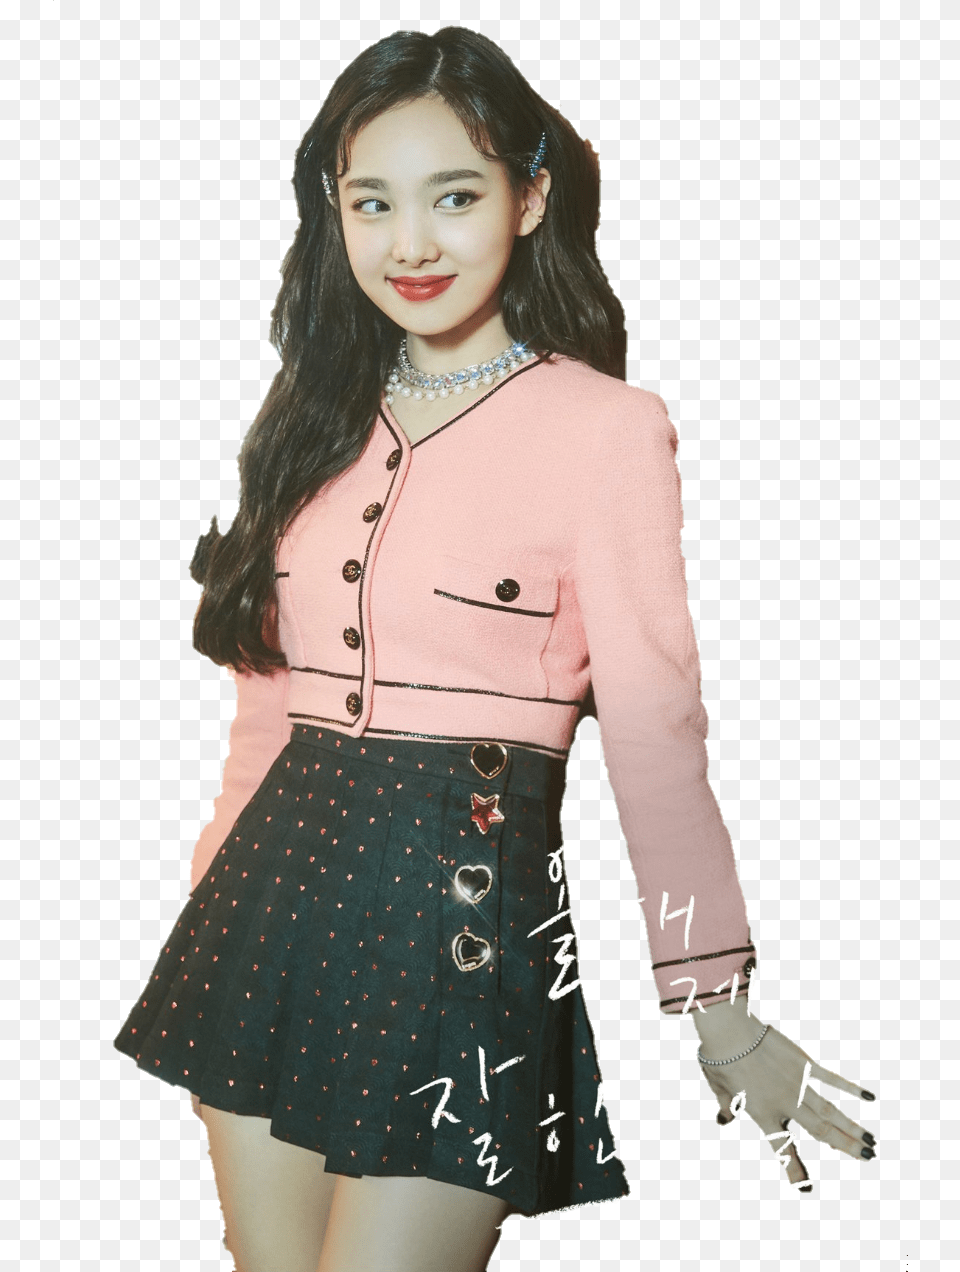 Nayeon Twice Rendes Edits Coreadelsur Overlays Nayeon Twice Nayeon Stage Outfits, Clothing, Skirt, Glove, Blouse Png